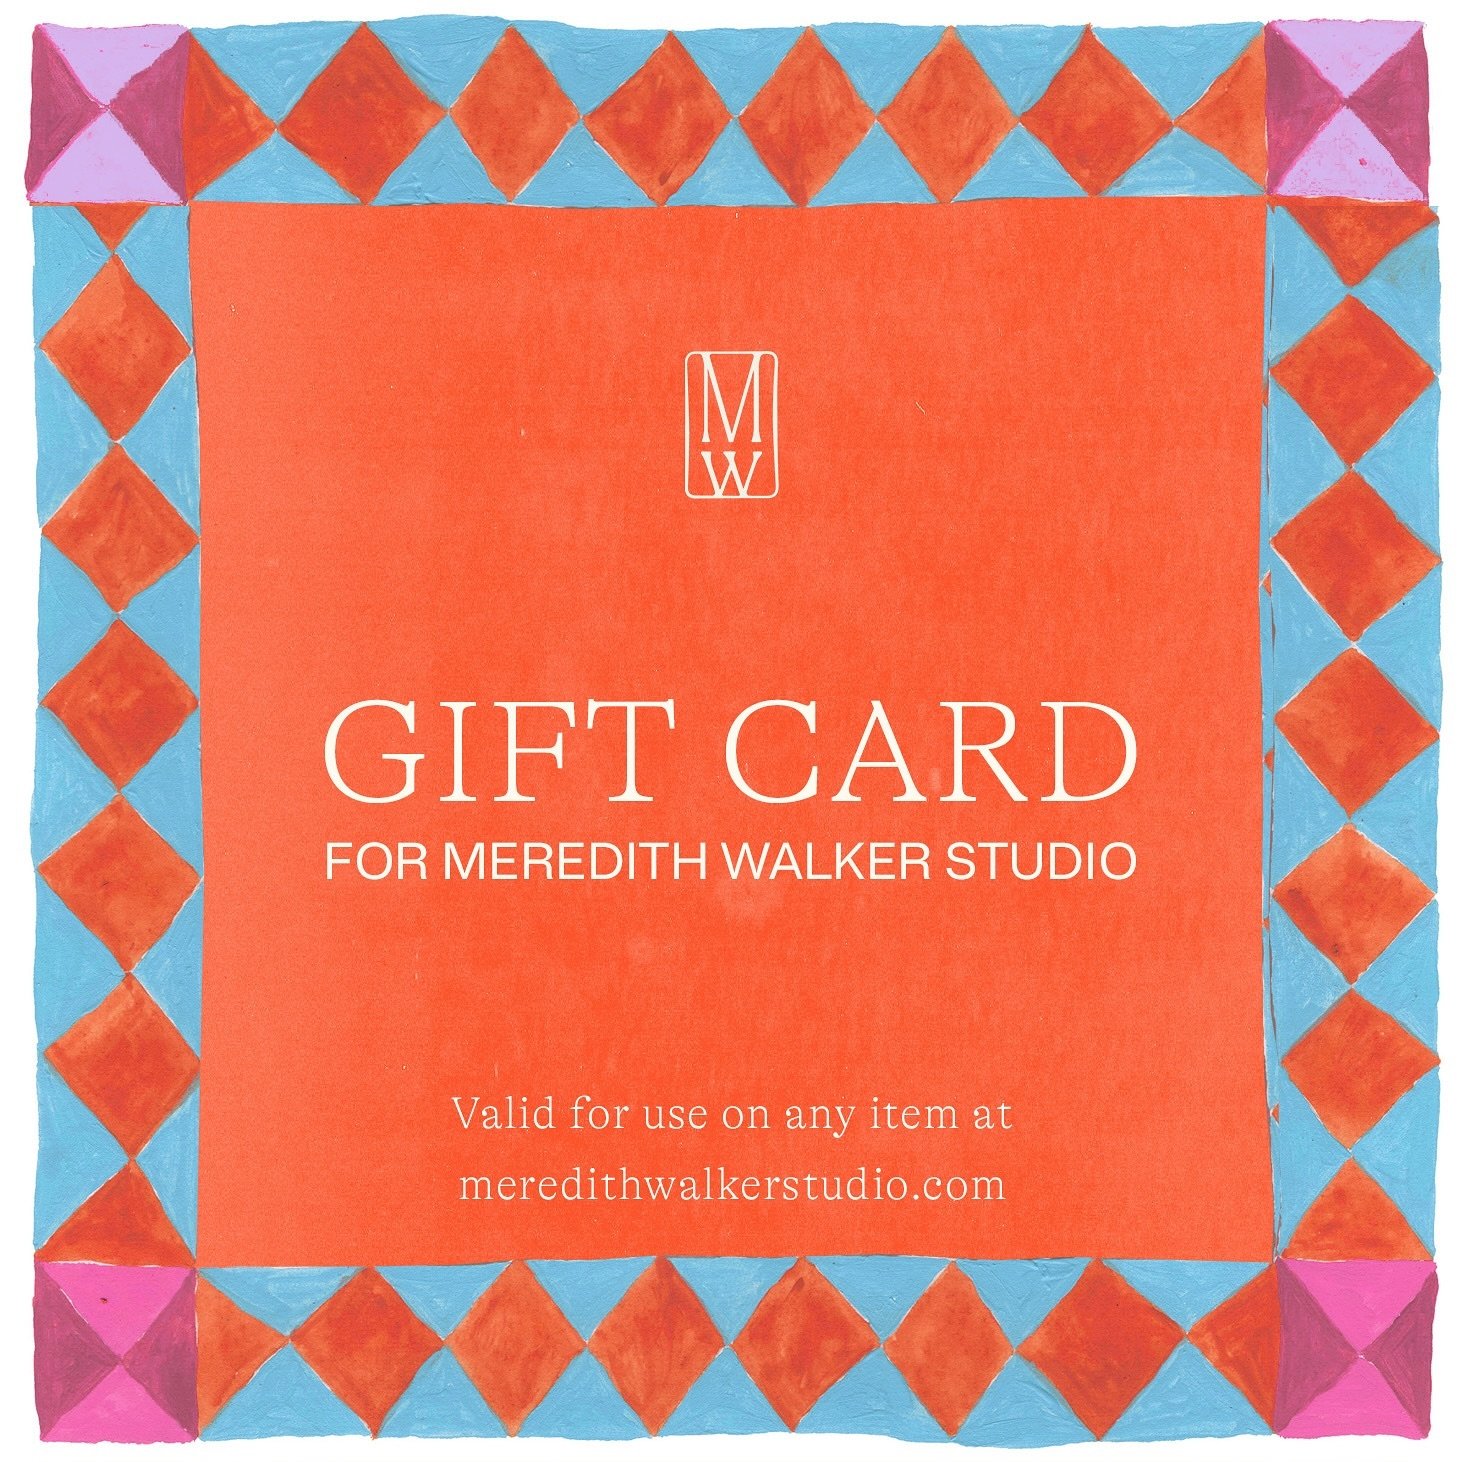 gift cards now available at meredithwalkerstudio.com ✺ link in bio to shop for your mama